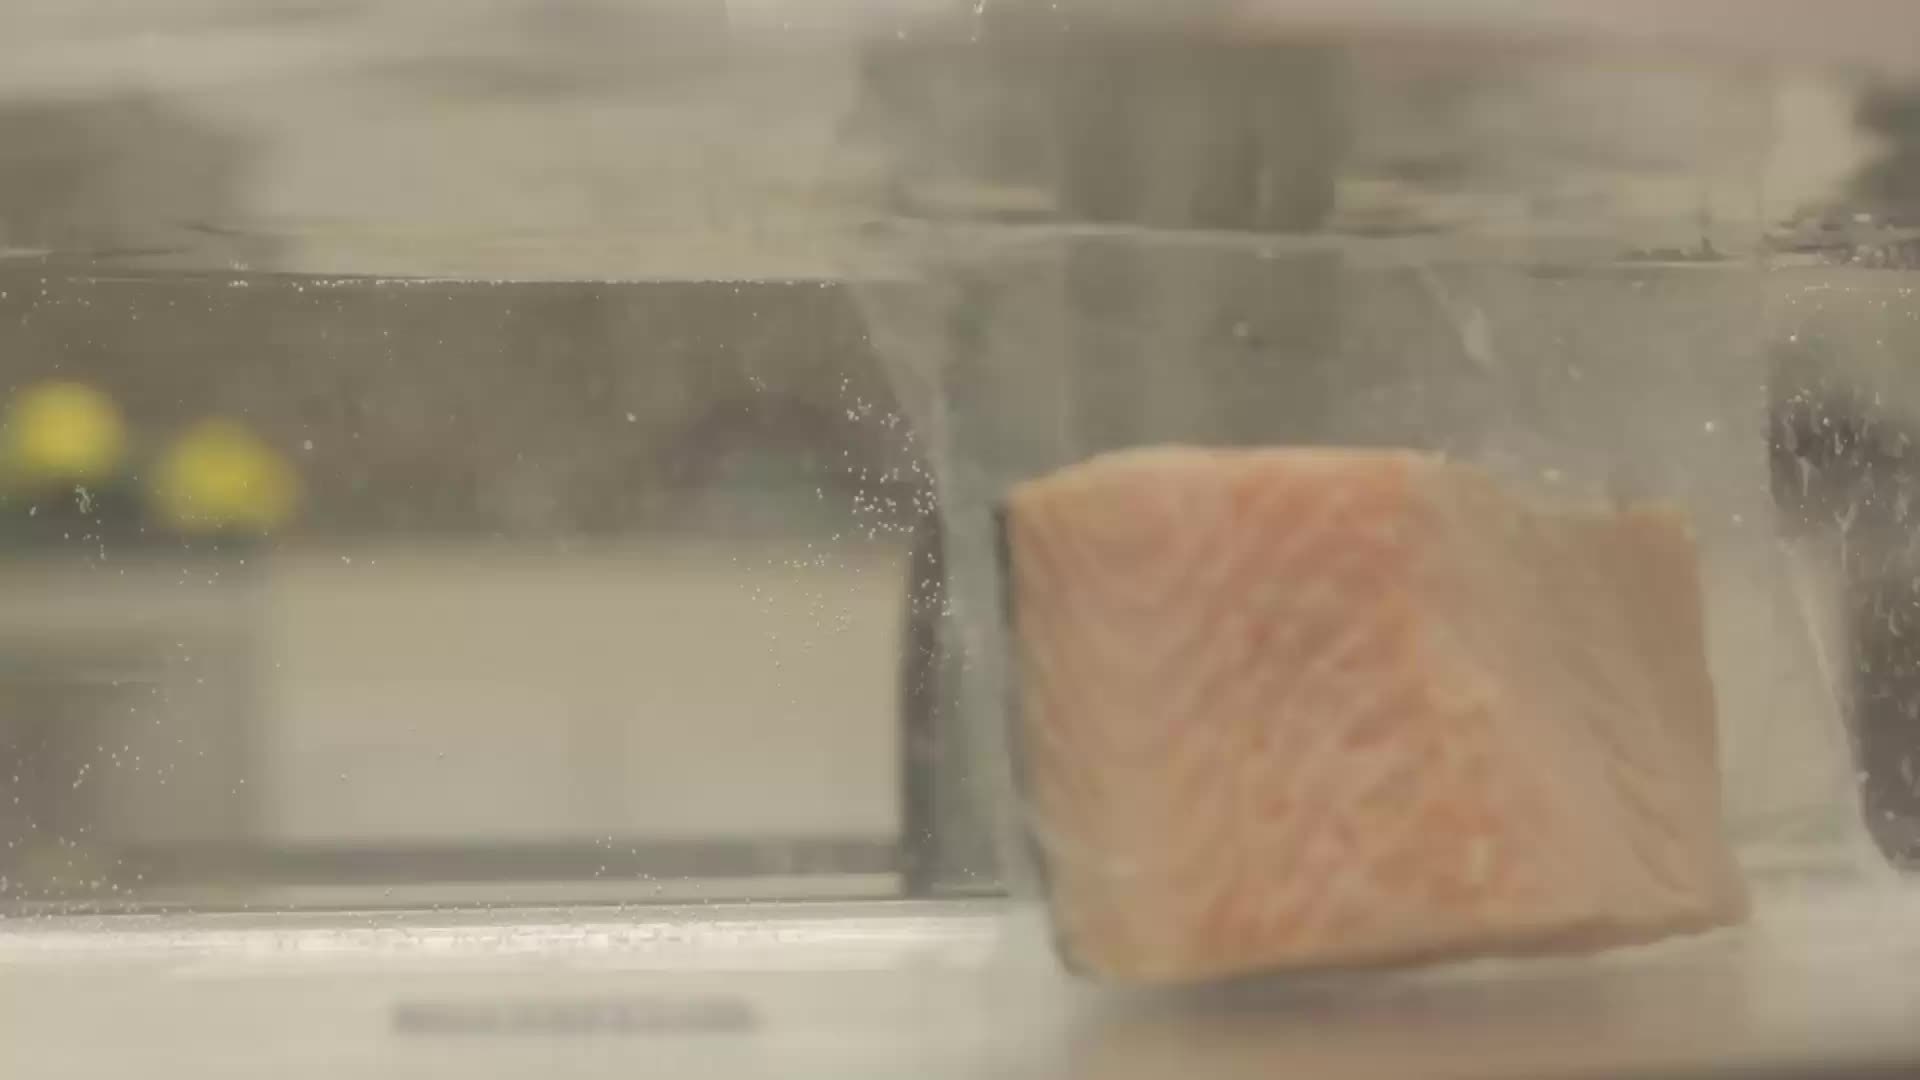 https://upload.wikimedia.org/wikipedia/commons/thumb/f/f6/Sous_vide_overview_by_Nomiku_with_VO.webm/1920px--Sous_vide_overview_by_Nomiku_with_VO.webm.jpg